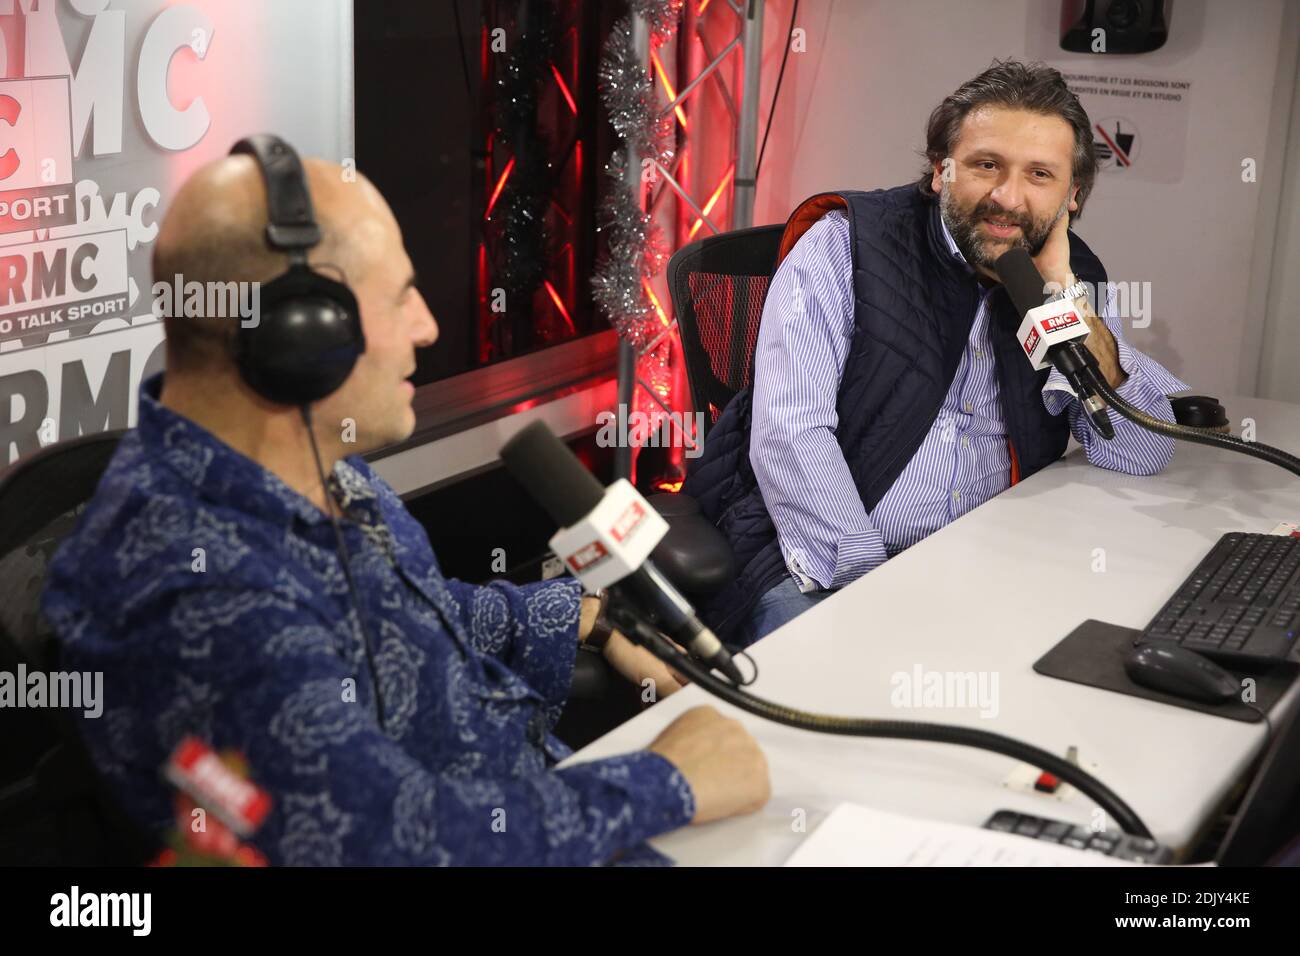 Exclusive - Bruno Doucet at the 'Moscato Show' talk show on RMC Radio,  interviewed by Vincent Moscato, Eric Di Meco, Frank Leboeuf, Pierre Dorian  and Adrien Aigouin in Paris, France, on December